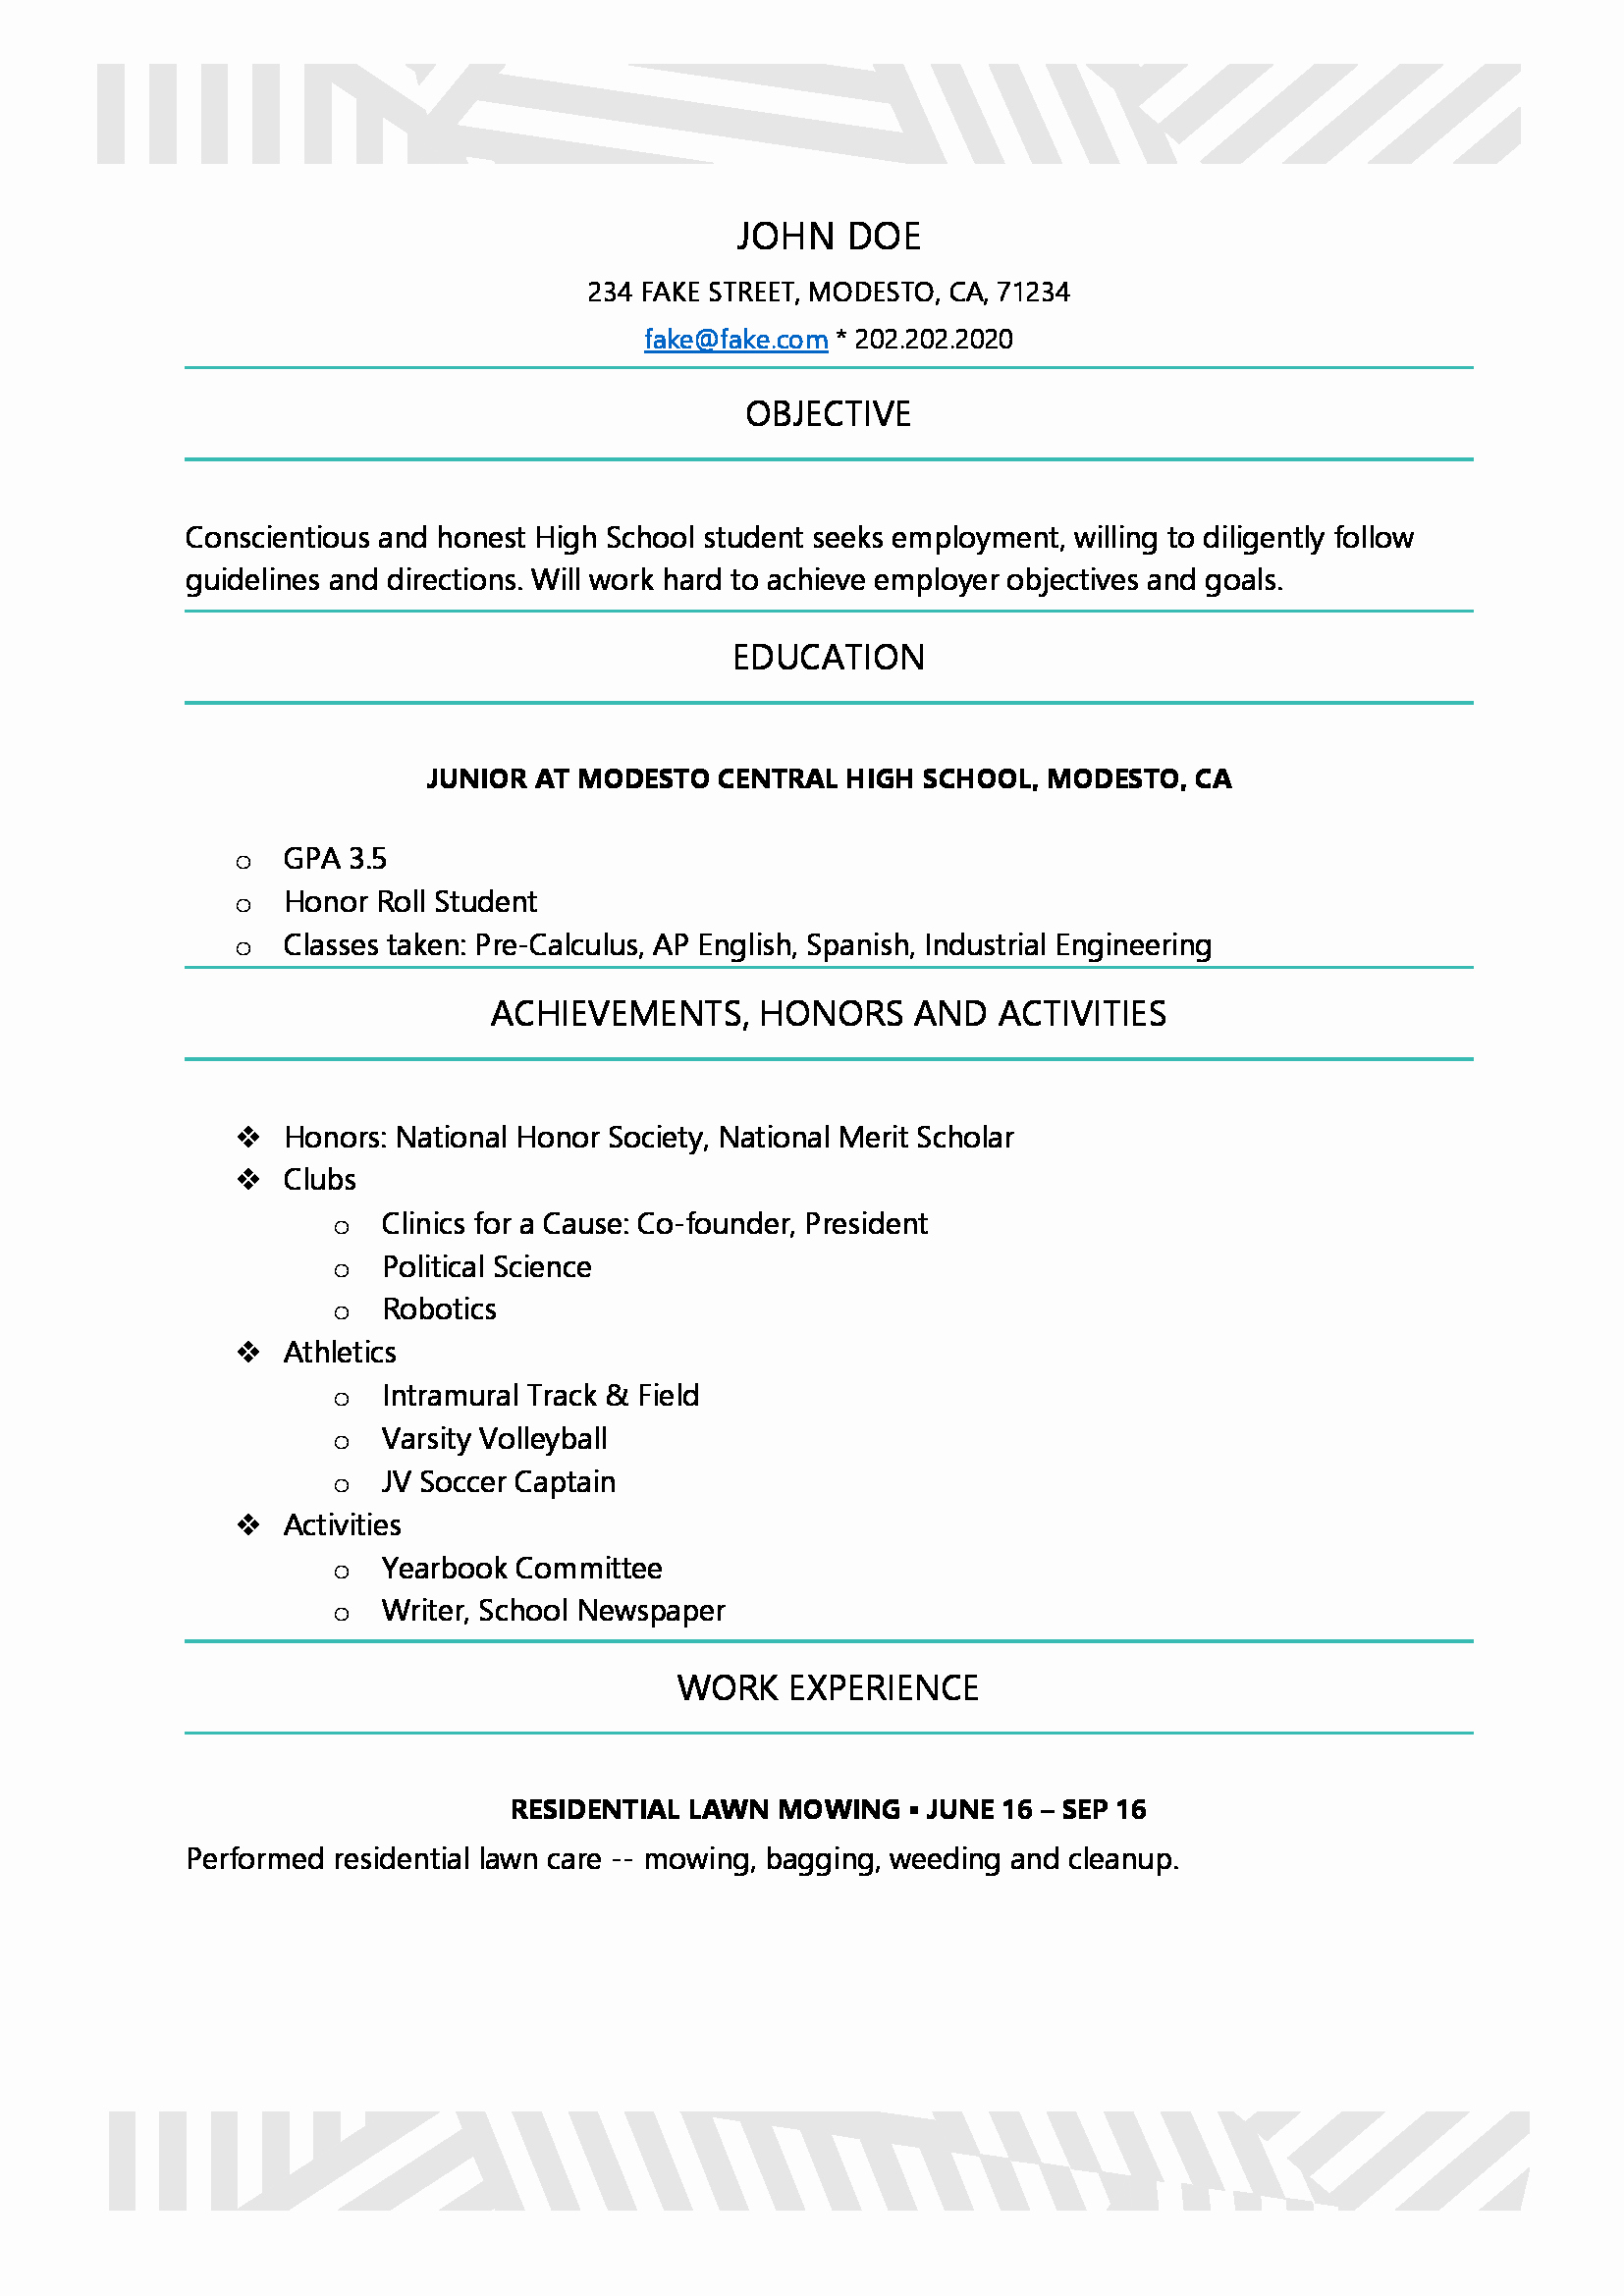 Resume Examples for Highschool Students Lovely High School Resume Resumes Perfect for High School Students